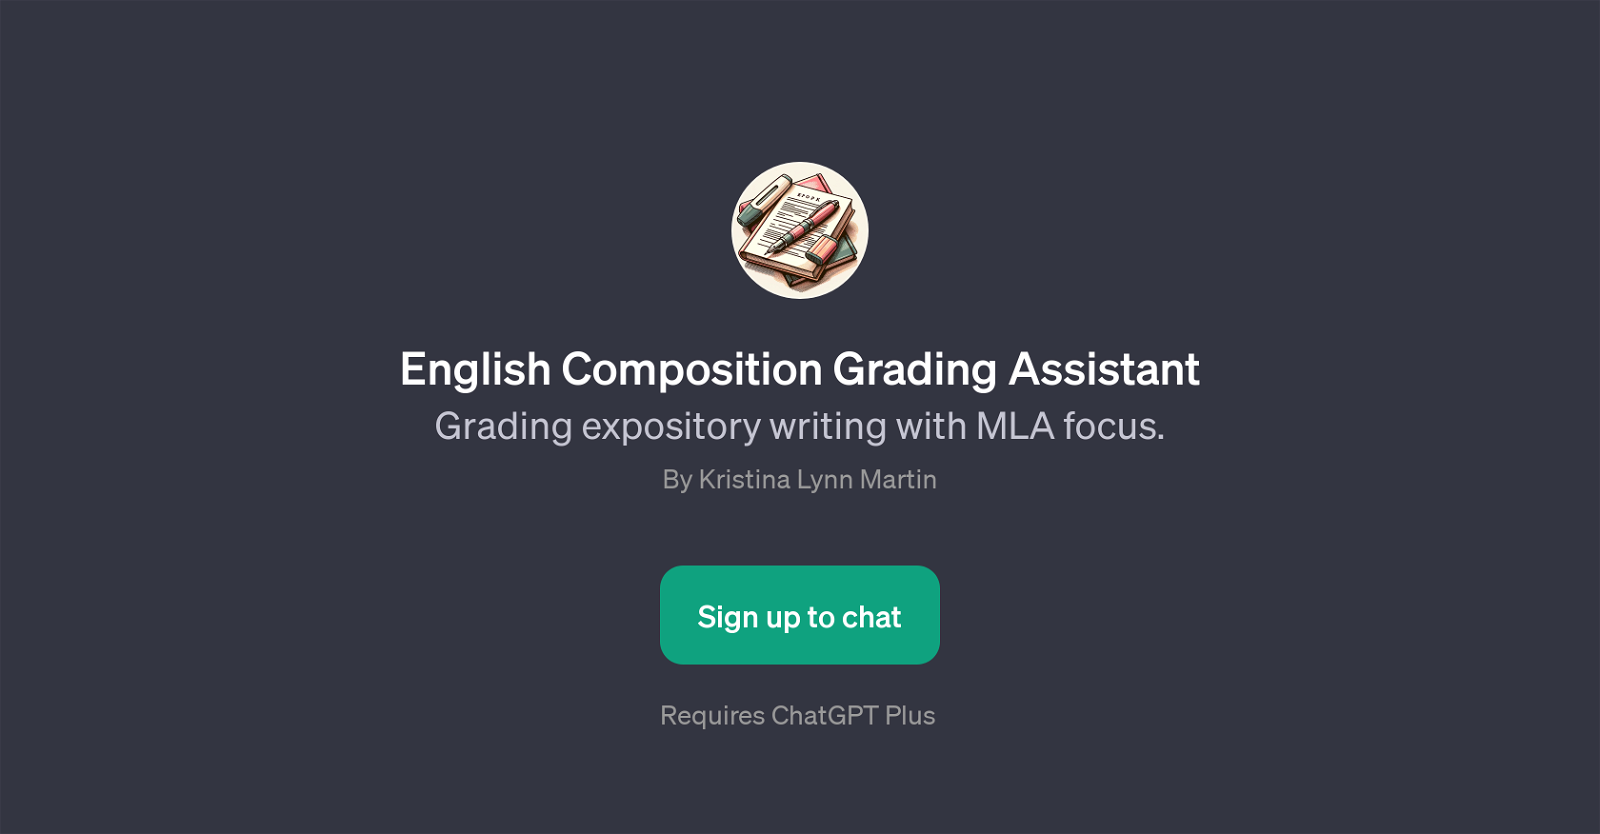 English Composition Grading Assistant website